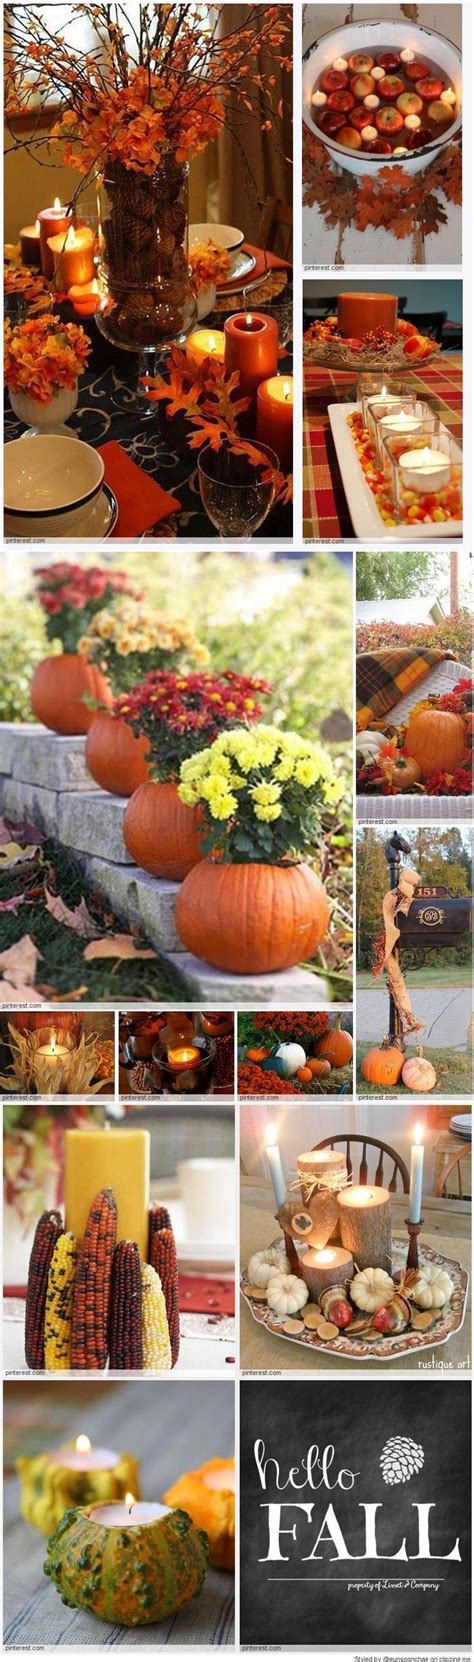 Fall Decorating Ideas Pictures Photos And Images For